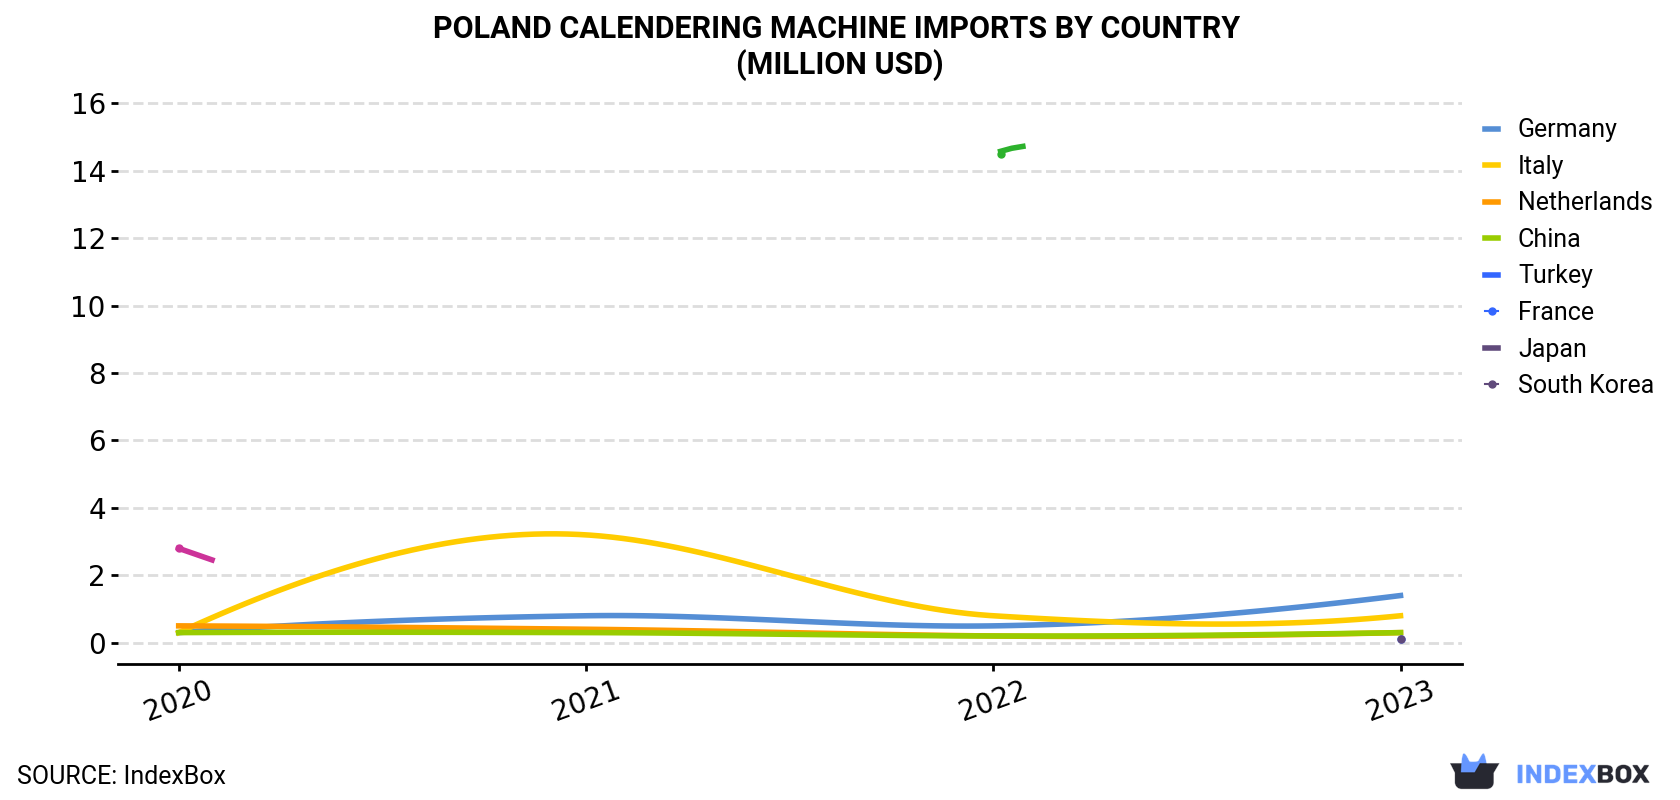 Poland Calendering Machine Imports By Country (Million USD)